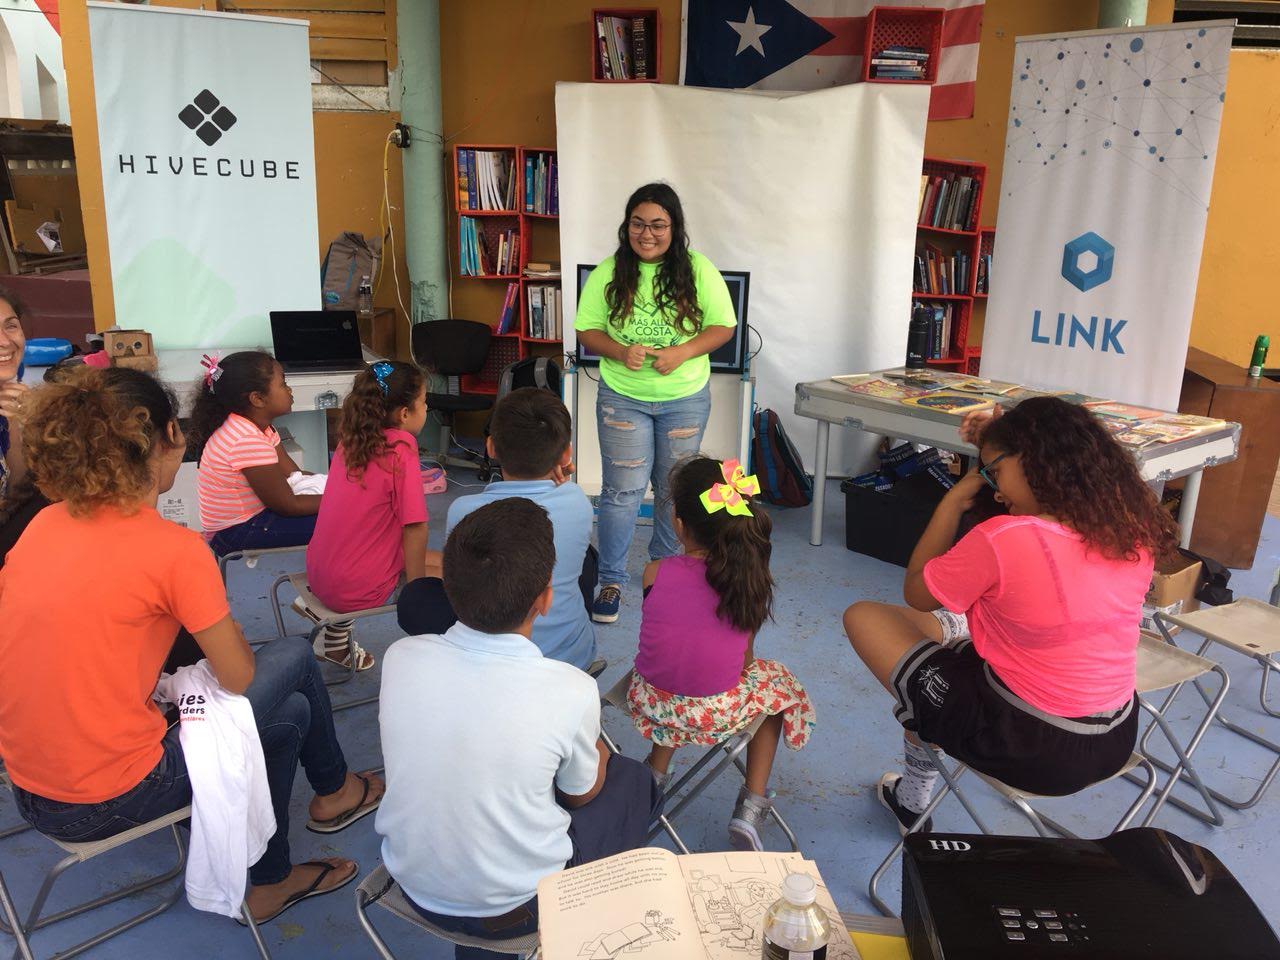 A young woman presents to a group of youth who circle her.